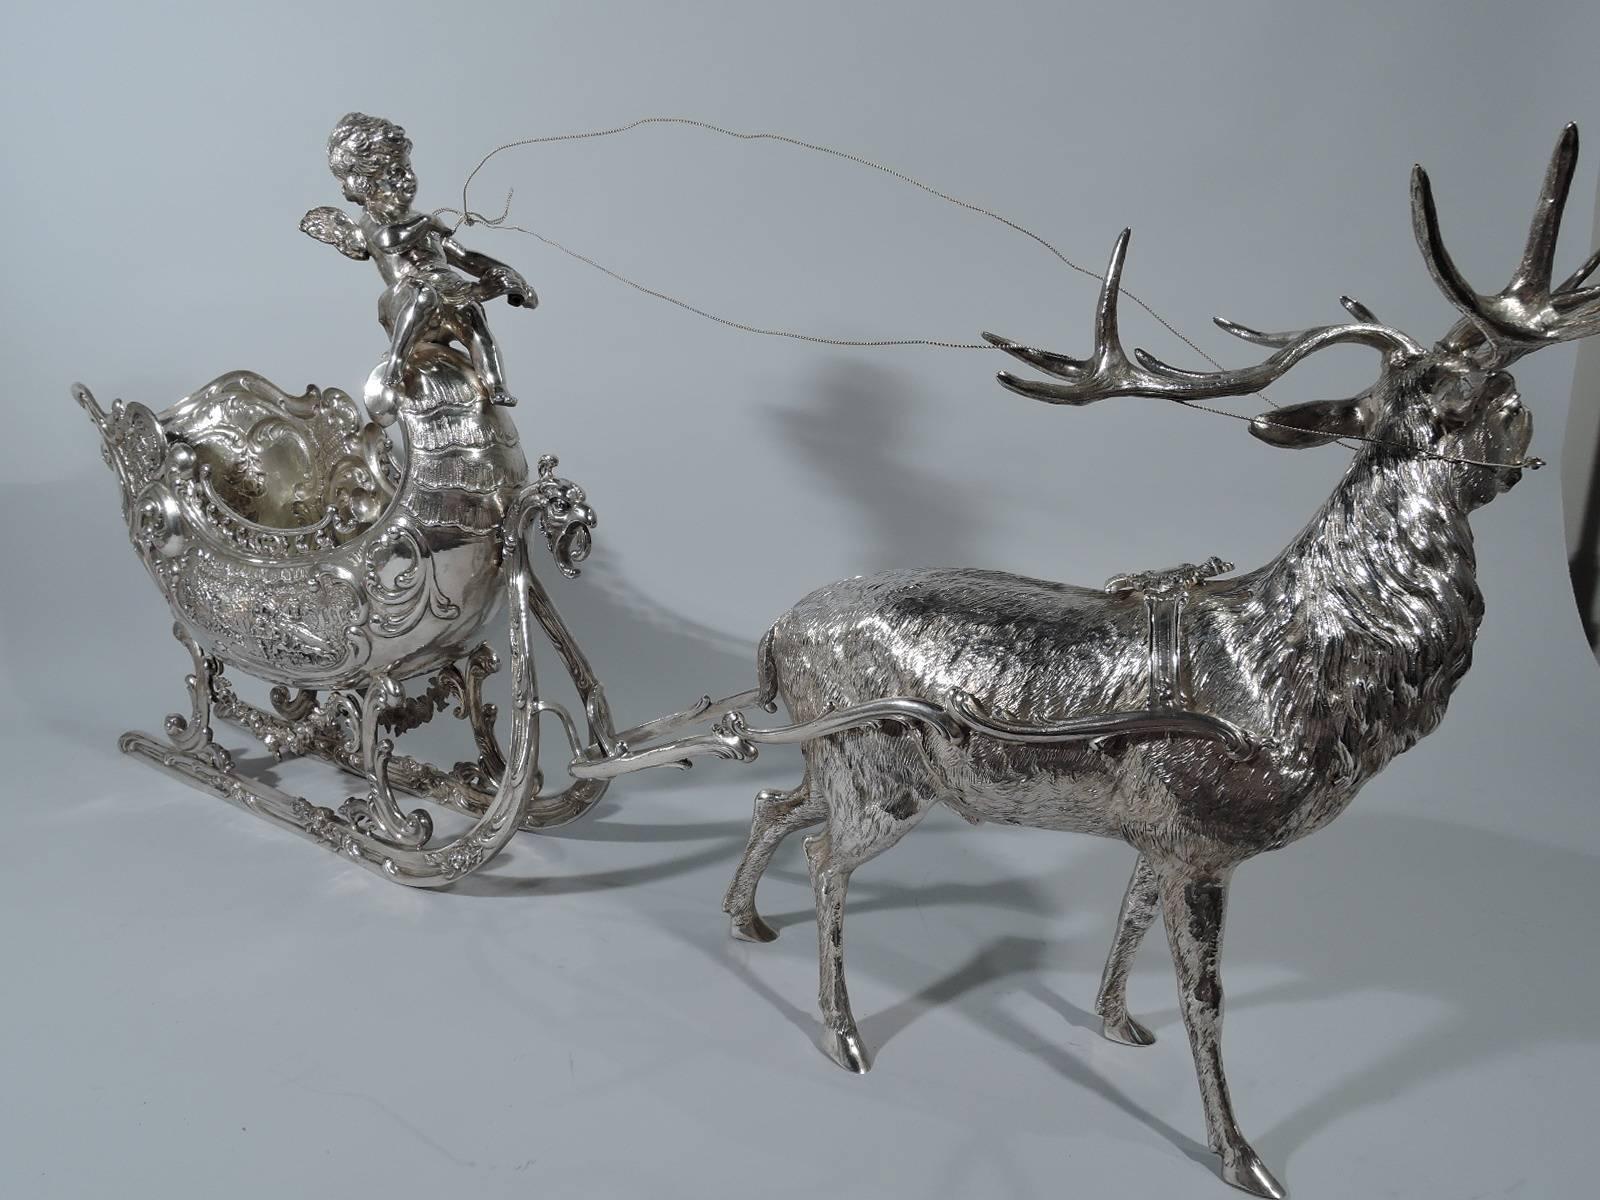 Antique German 800 silver sleigh. Ovoid with floral and diaper ornament and hunt scenes with spear-bearing men and side-saddled ladies accompanied by yapping, nipping hounds. Runners have bird’s head and applied flowers. The vehicle is piloted by a